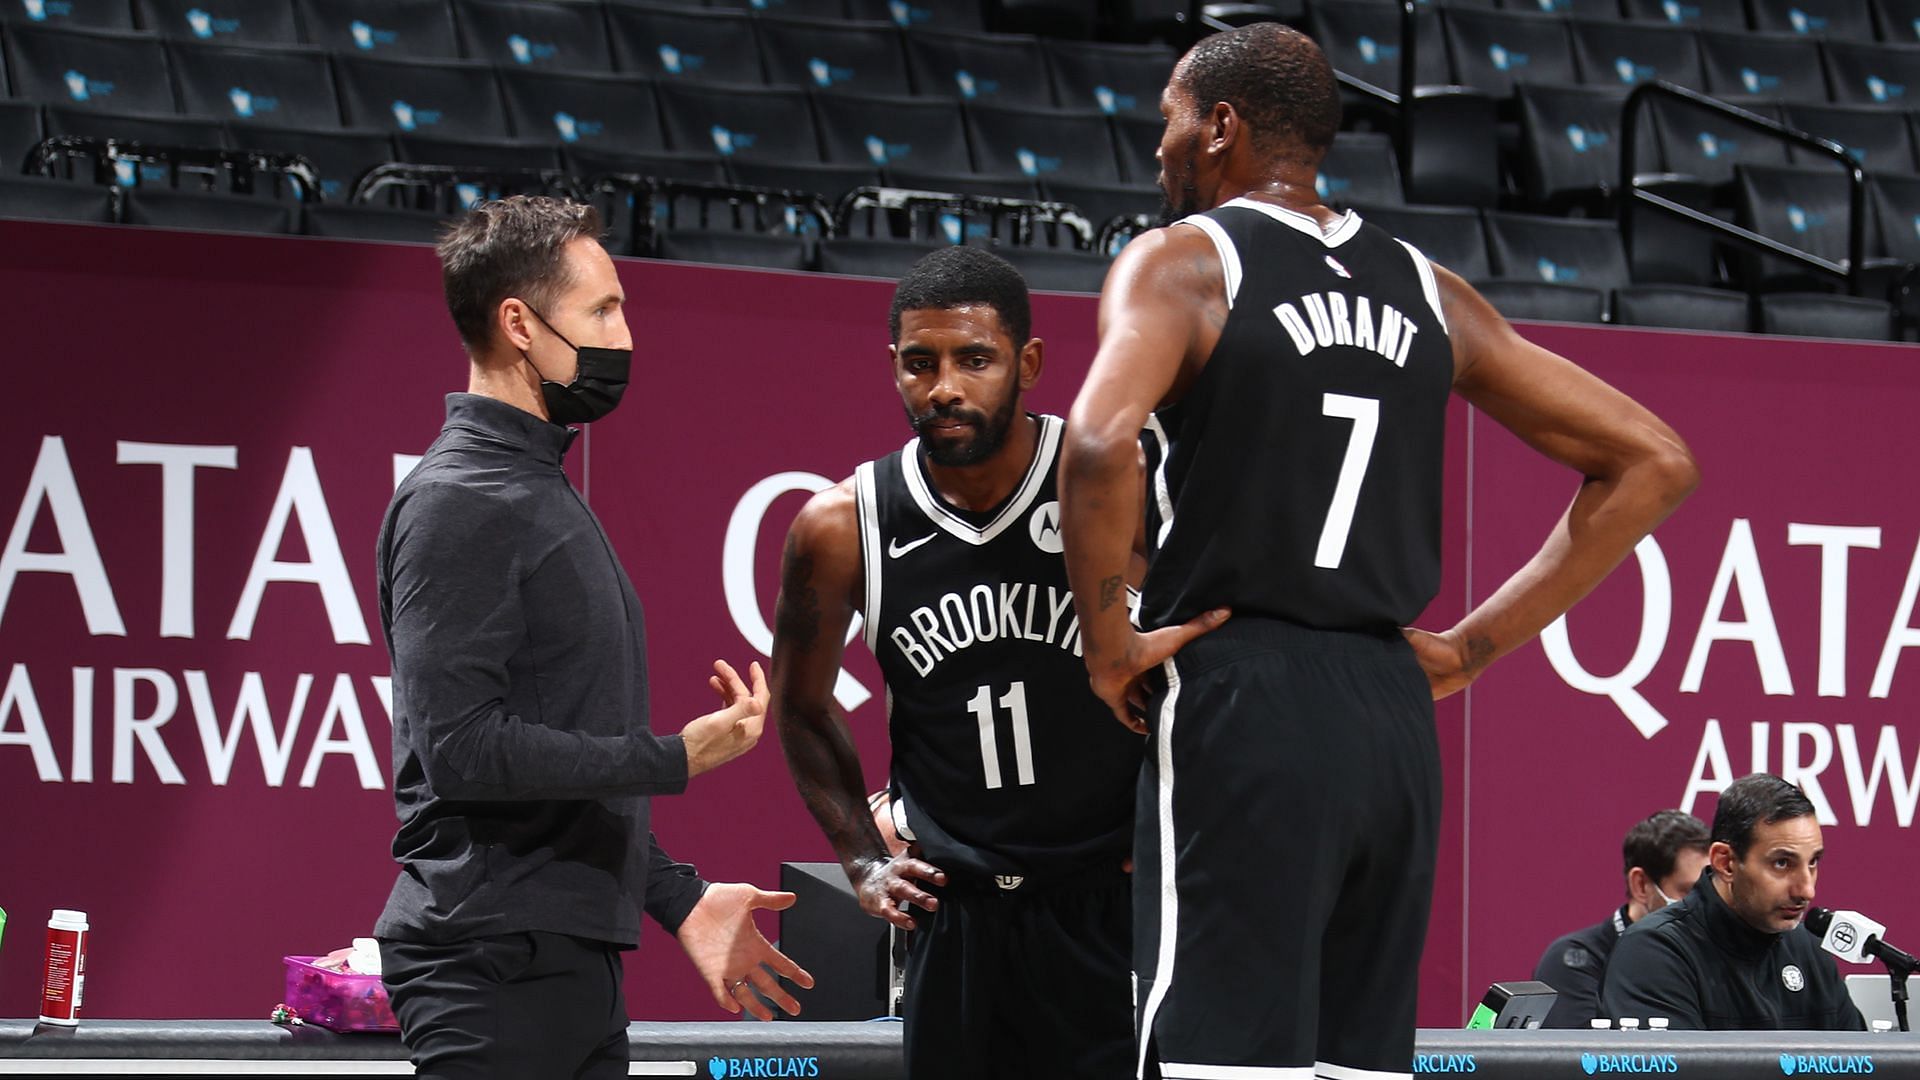 Steve Nash, Kyrie Irving, and Kevin Durant of the Brooklyn Nets [Photo: NBA]